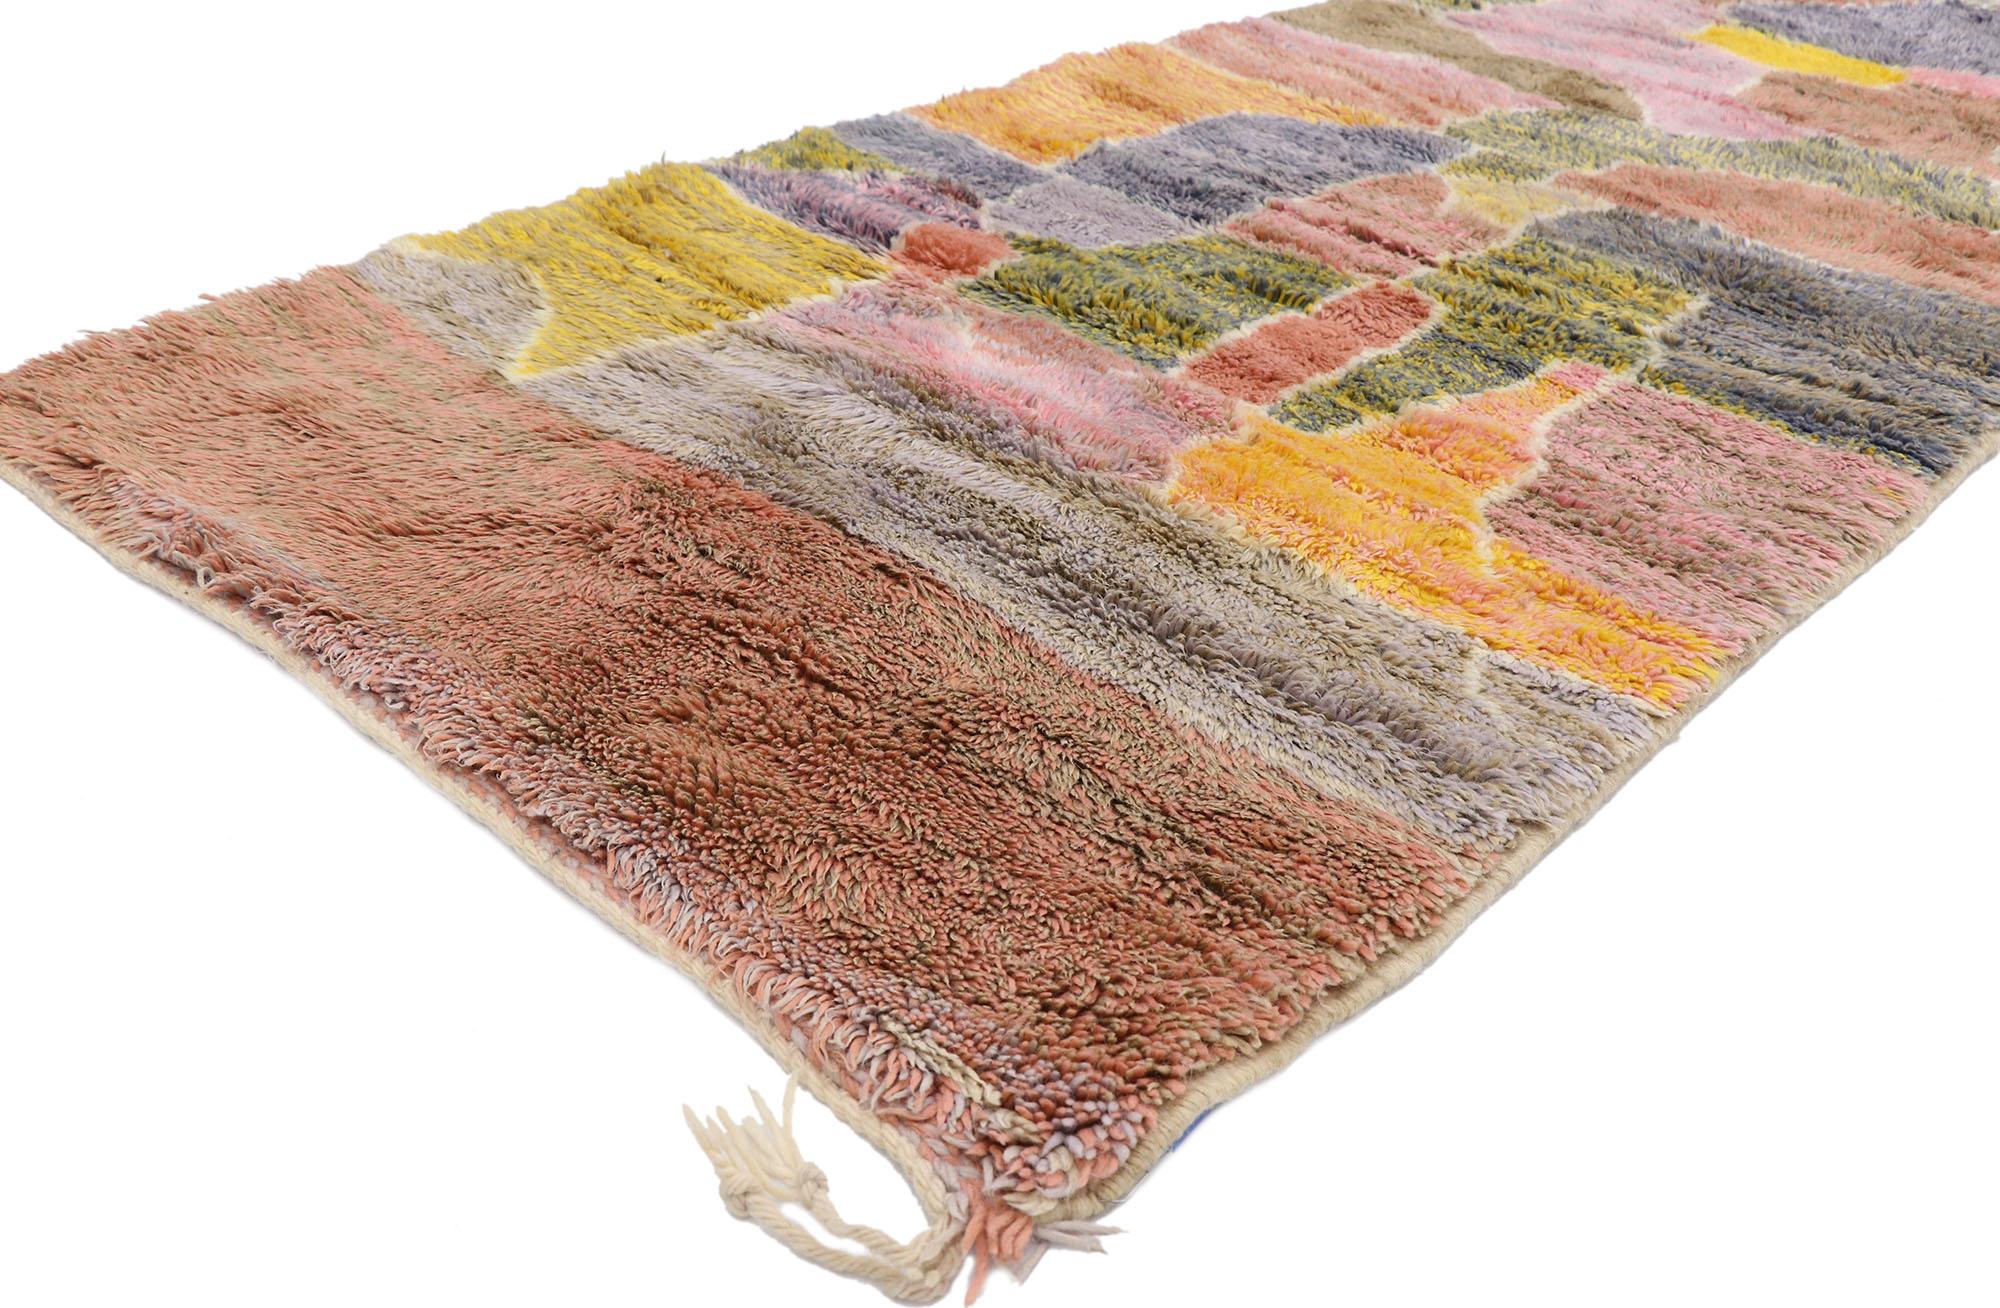 21110 New Colorful Abstract Moroccan Rug, 03'03 x 06'11.
Emanating nomadic charm with incredible detail and texture, this hand knotted wool Berber Moroccan runner is a captivating vision of woven beauty. The visual complexity and vibrant earthy